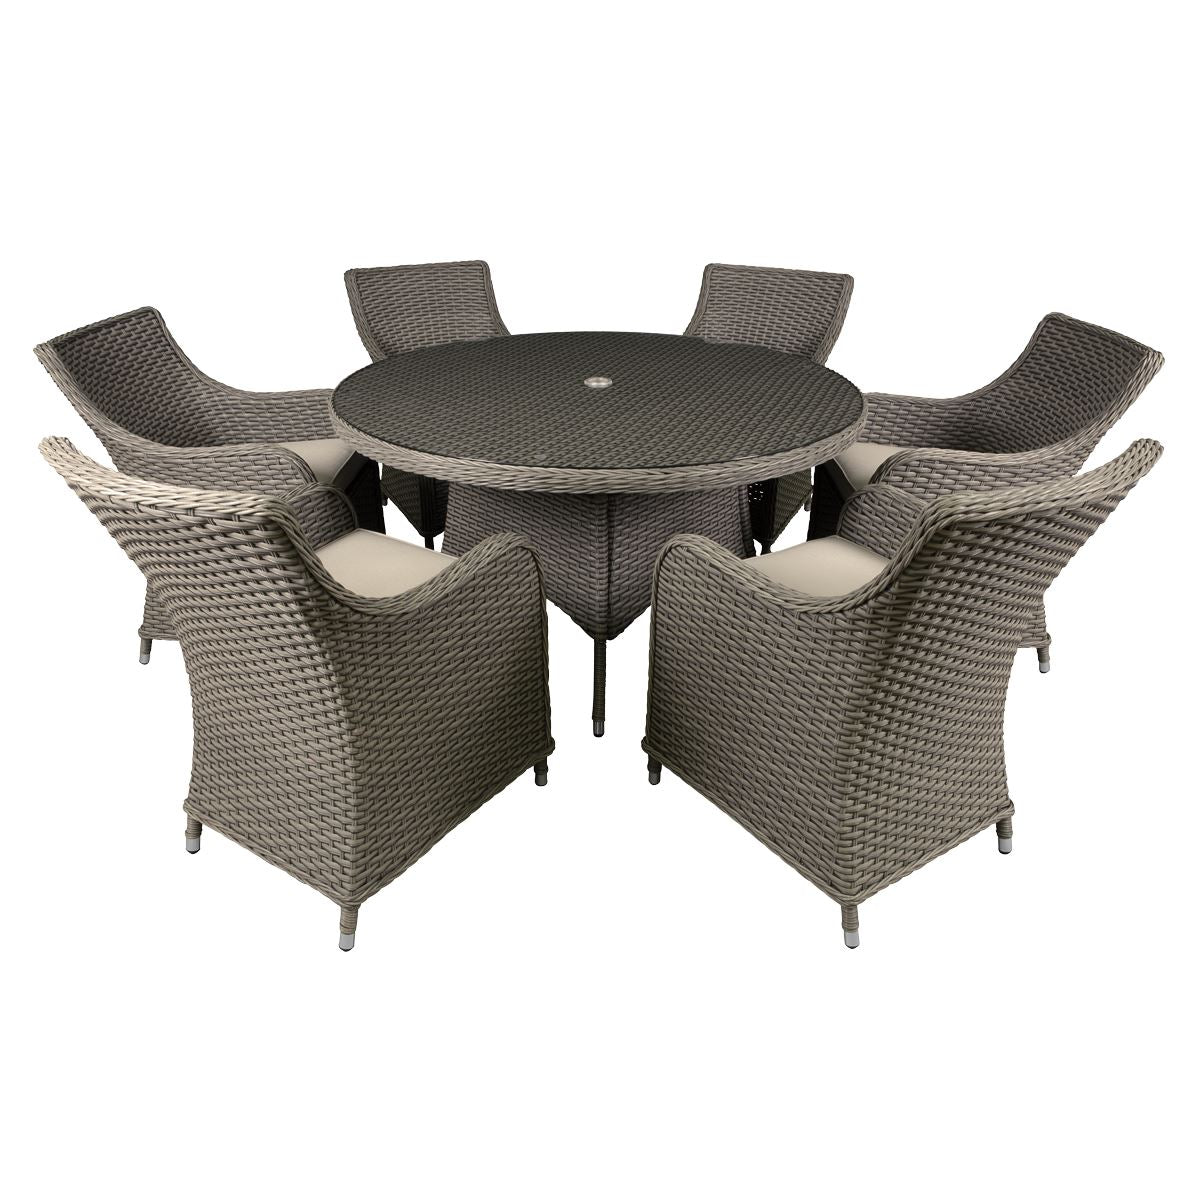 Dellonda Chester 7 Piece Rattan Wicker Outdoor Dining Set with Tempered Glass Table Top, Brown